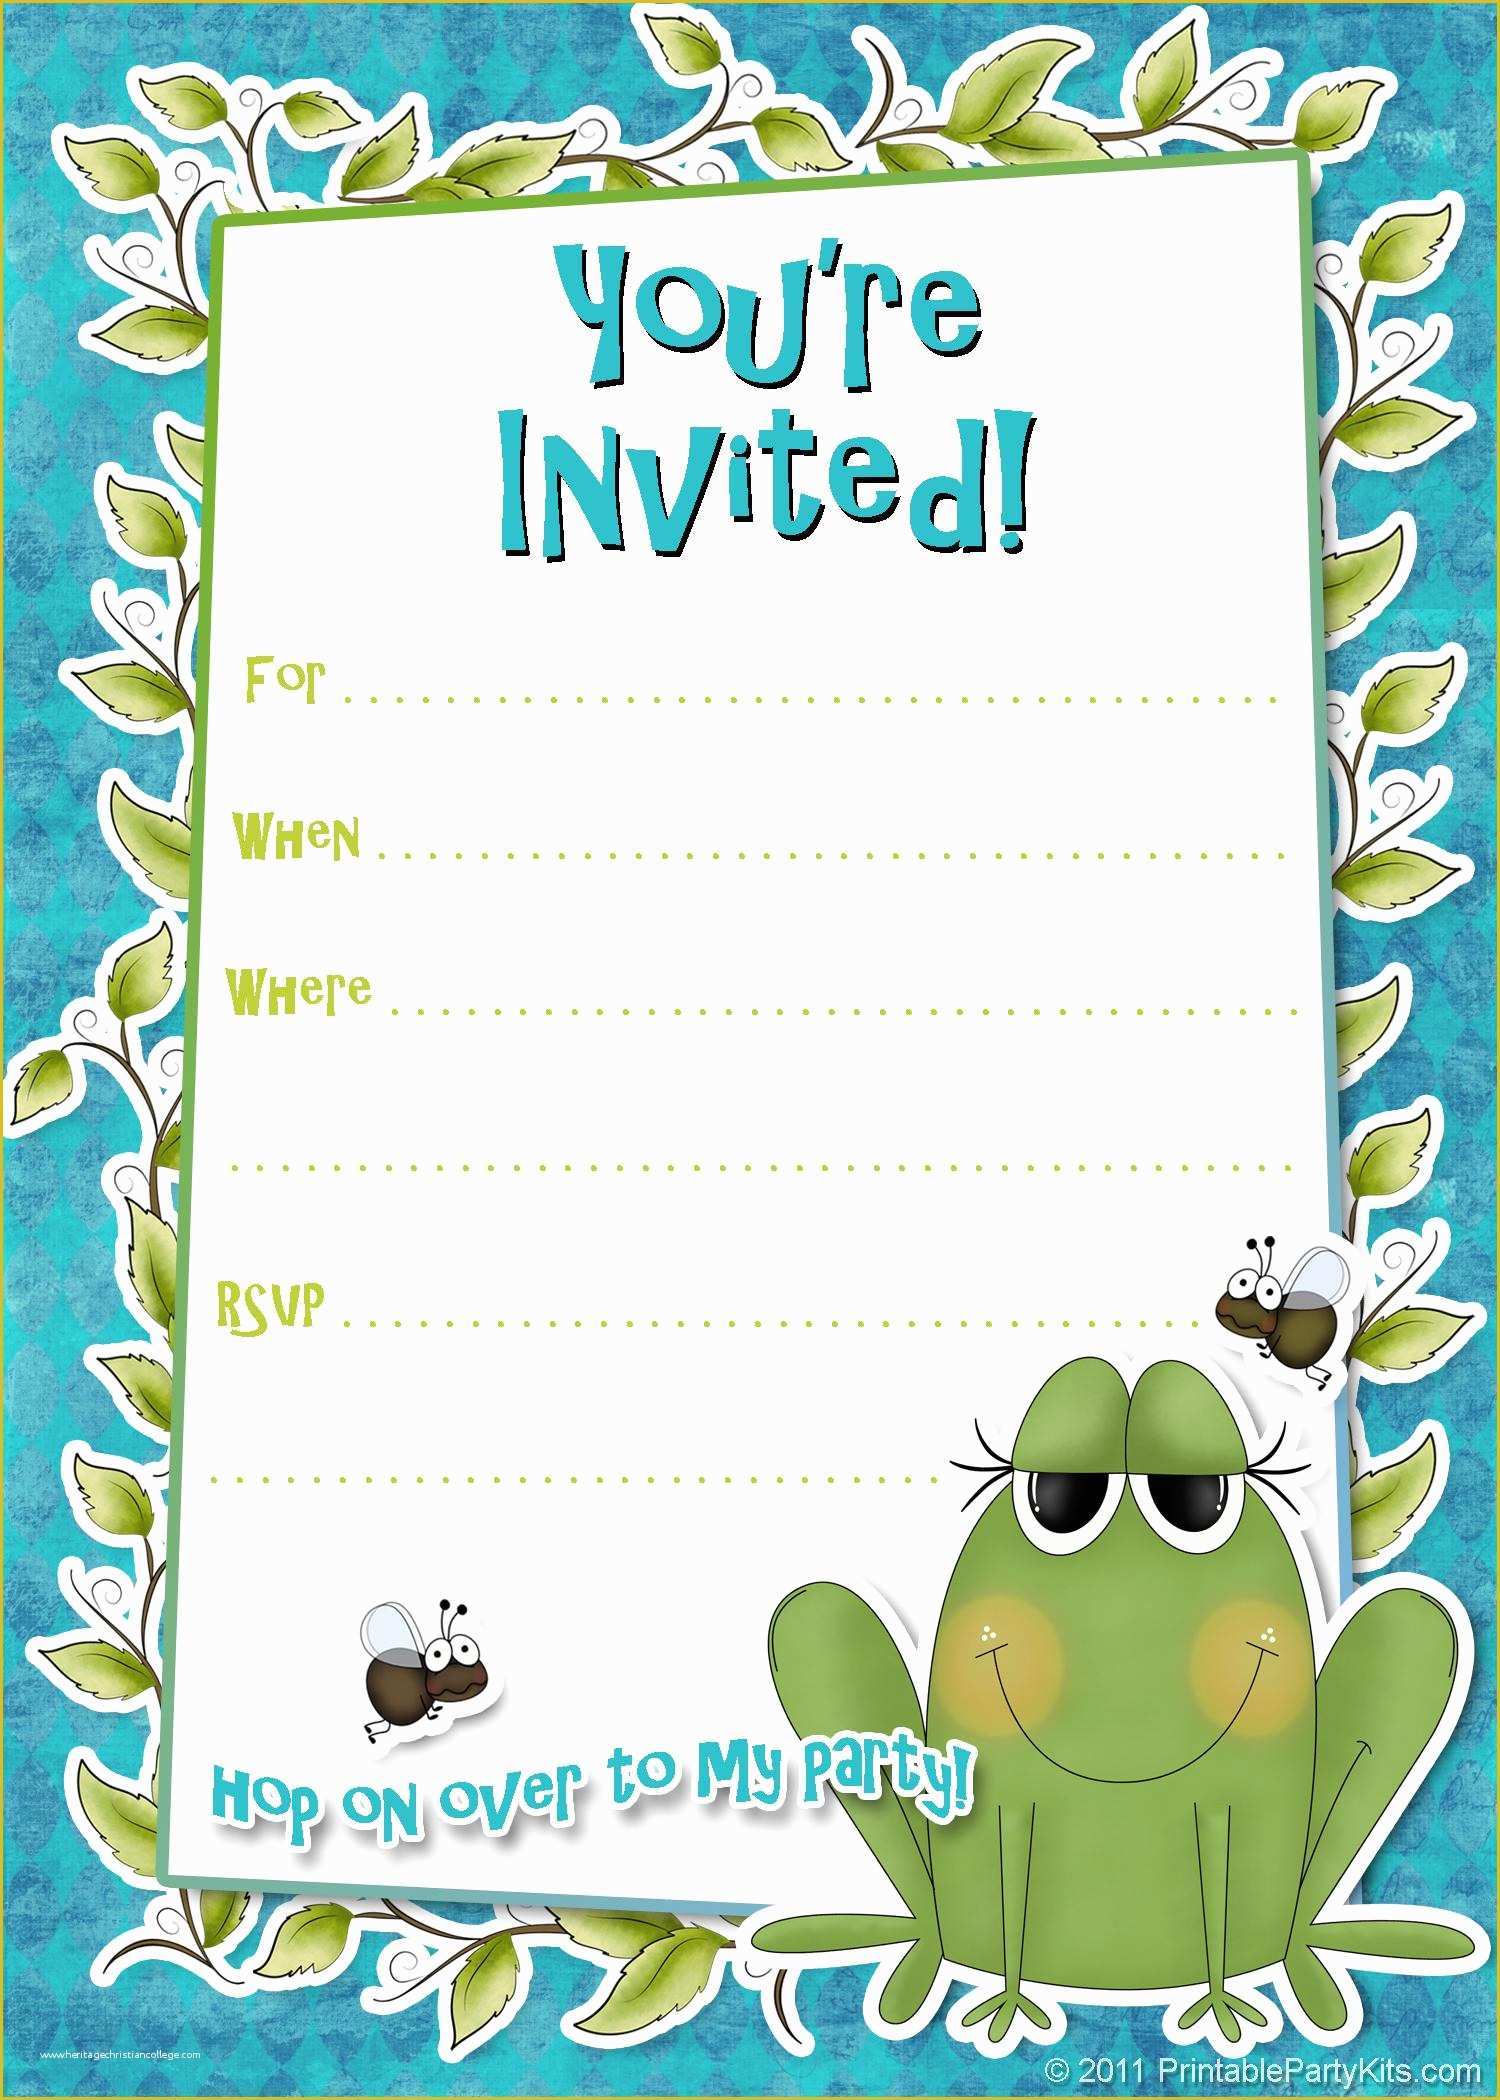 reception-invitation-templates-free-download-of-free-printable-party